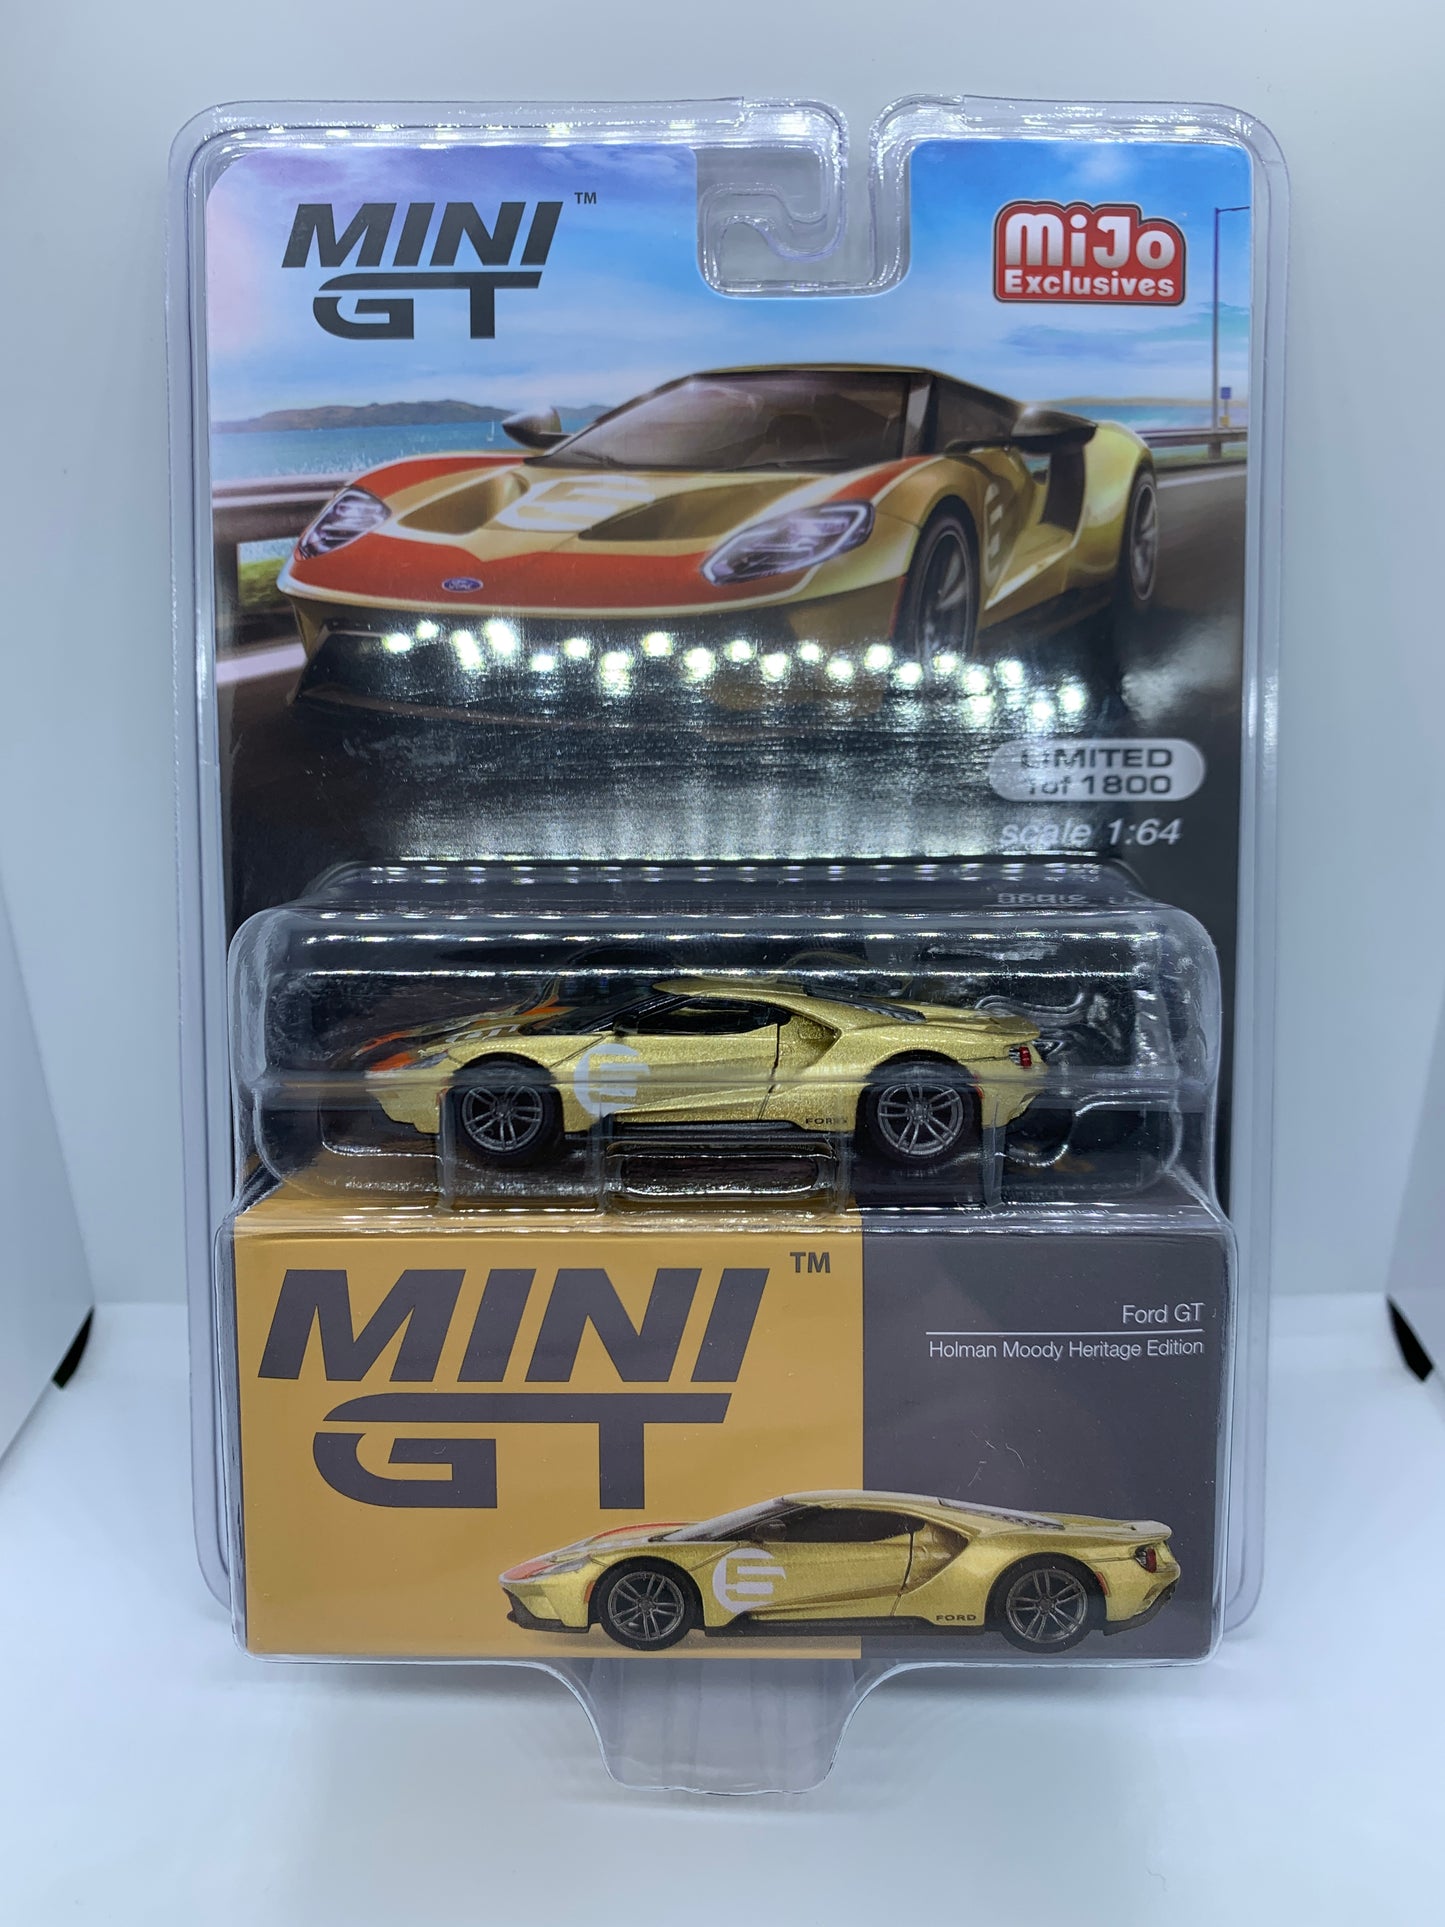 MINI GT - Ford GT Holman Moody Hertitage Edition Gold - Display Blister Packaging